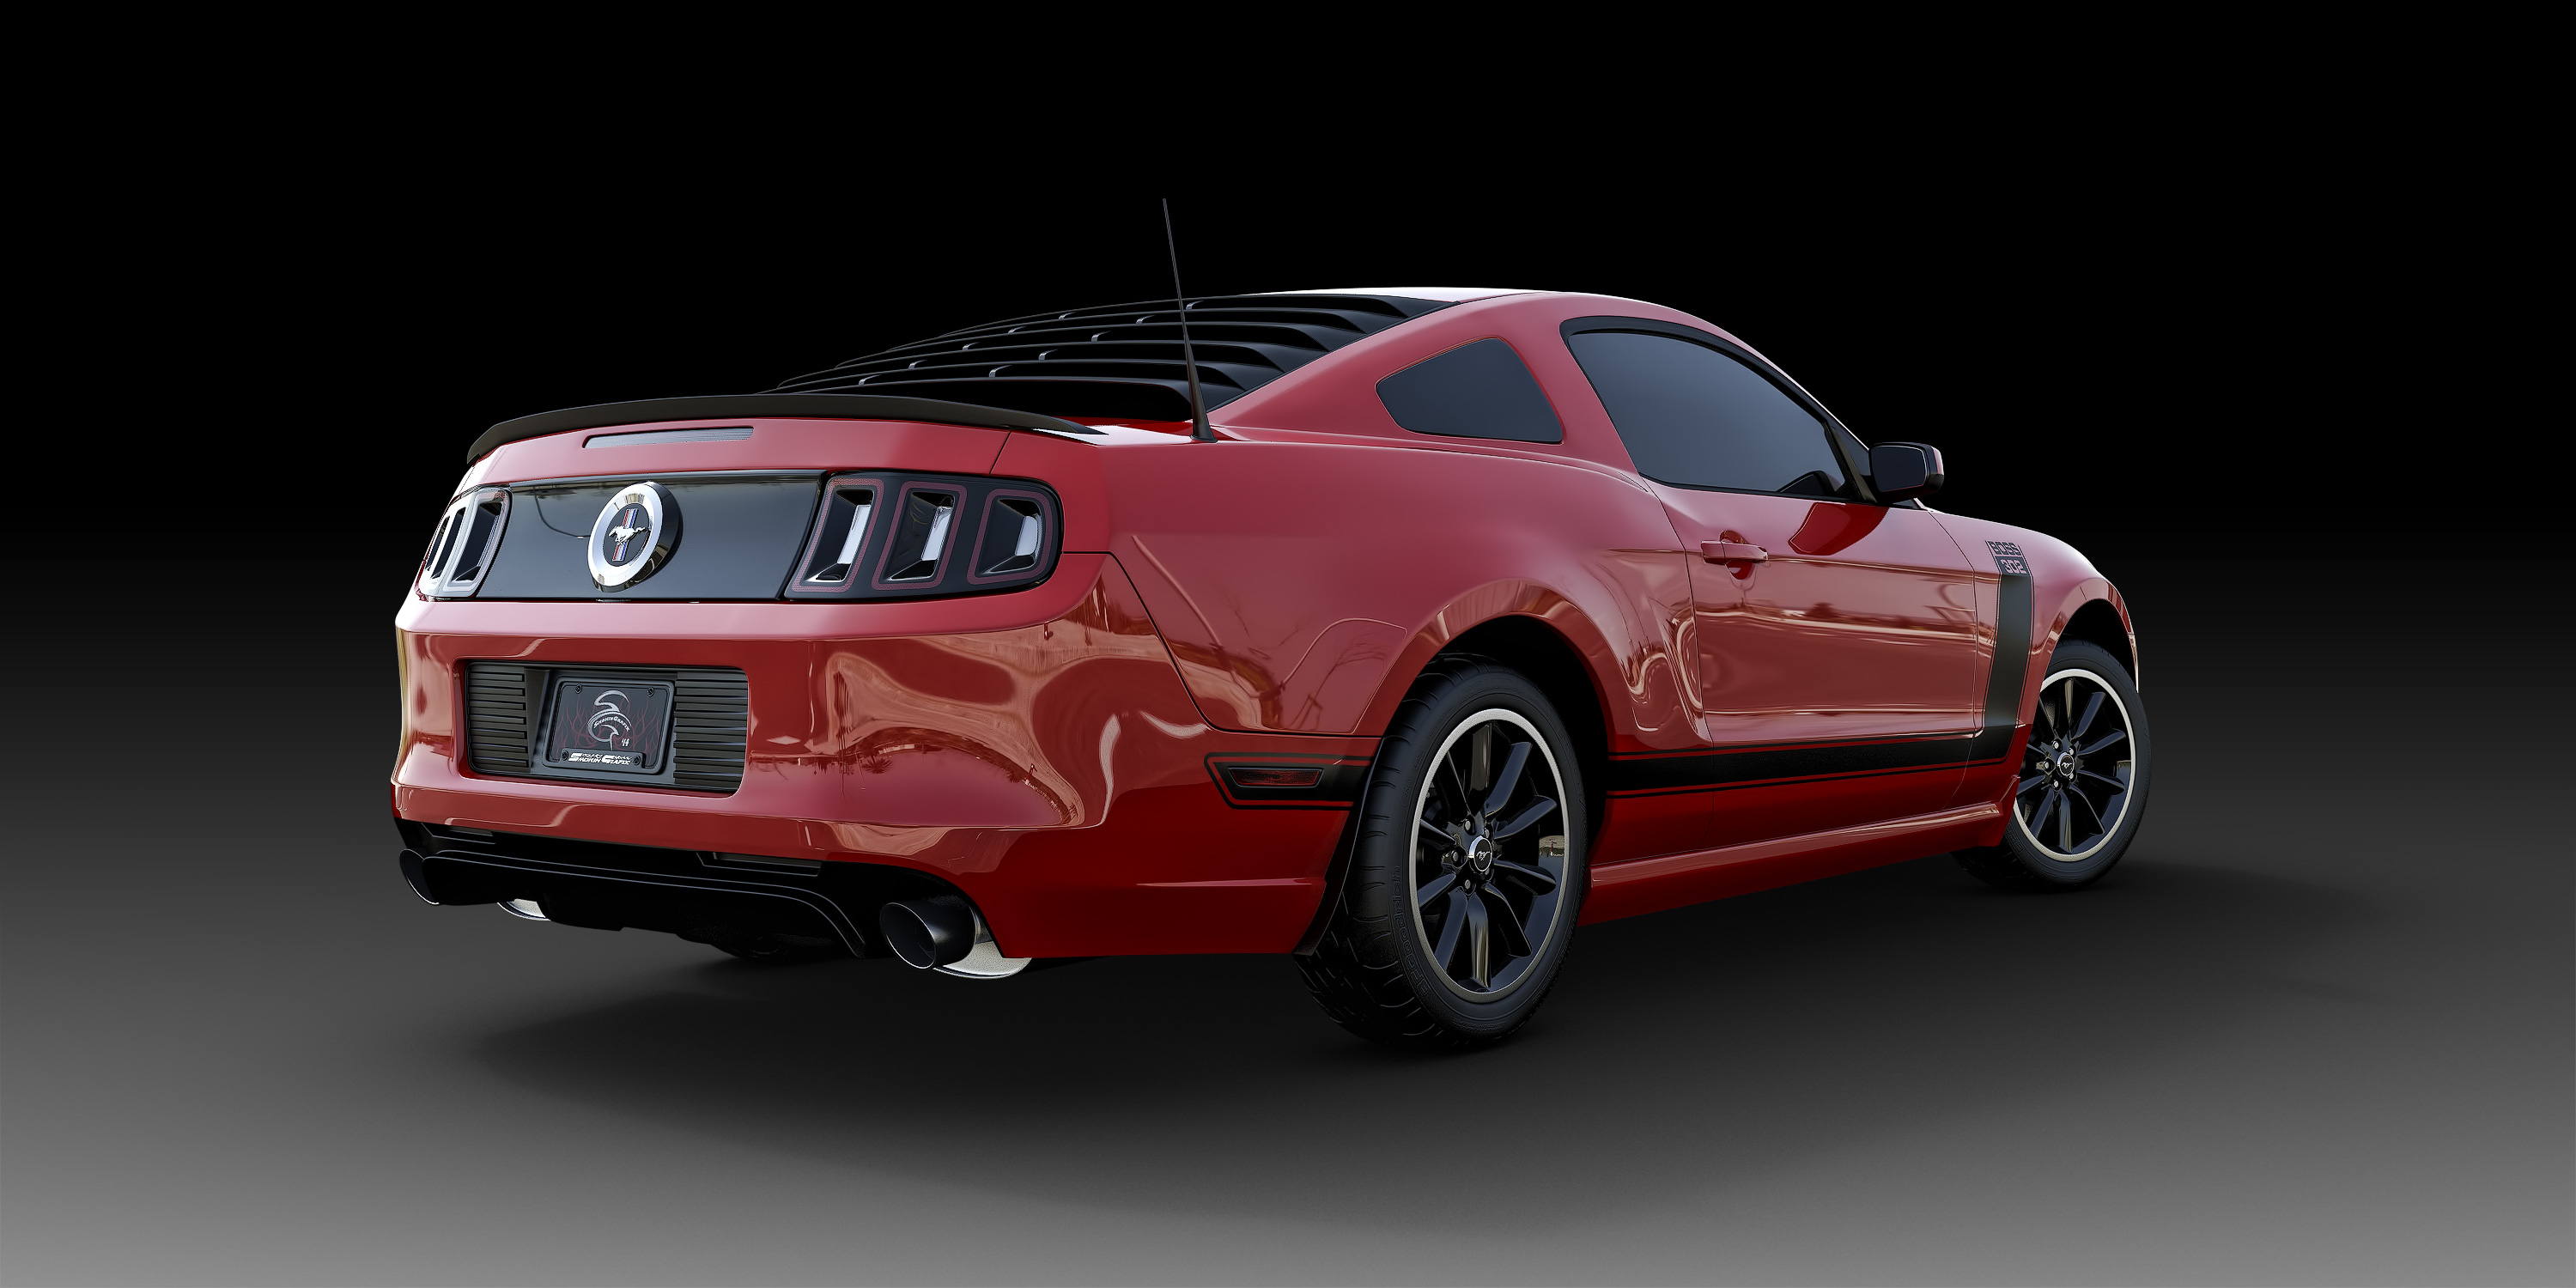 Car Ford Mustang Boss 302 Muscle Car Red Car 3000x1500